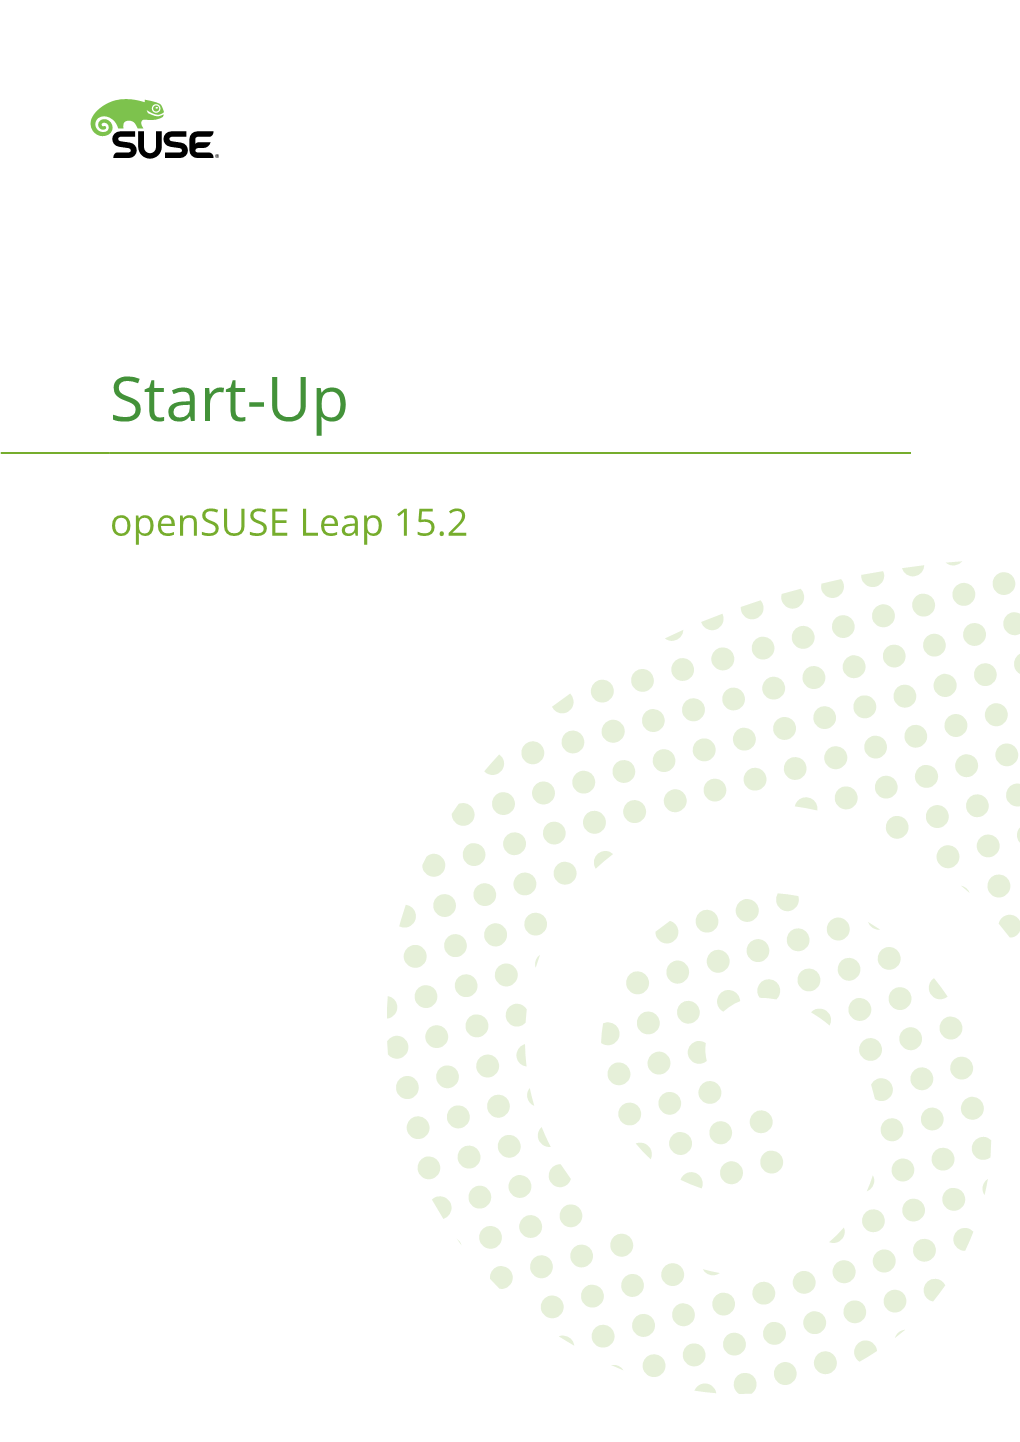 Opensuse Leap 15.2 Start-Up Opensuse Leap 15.2